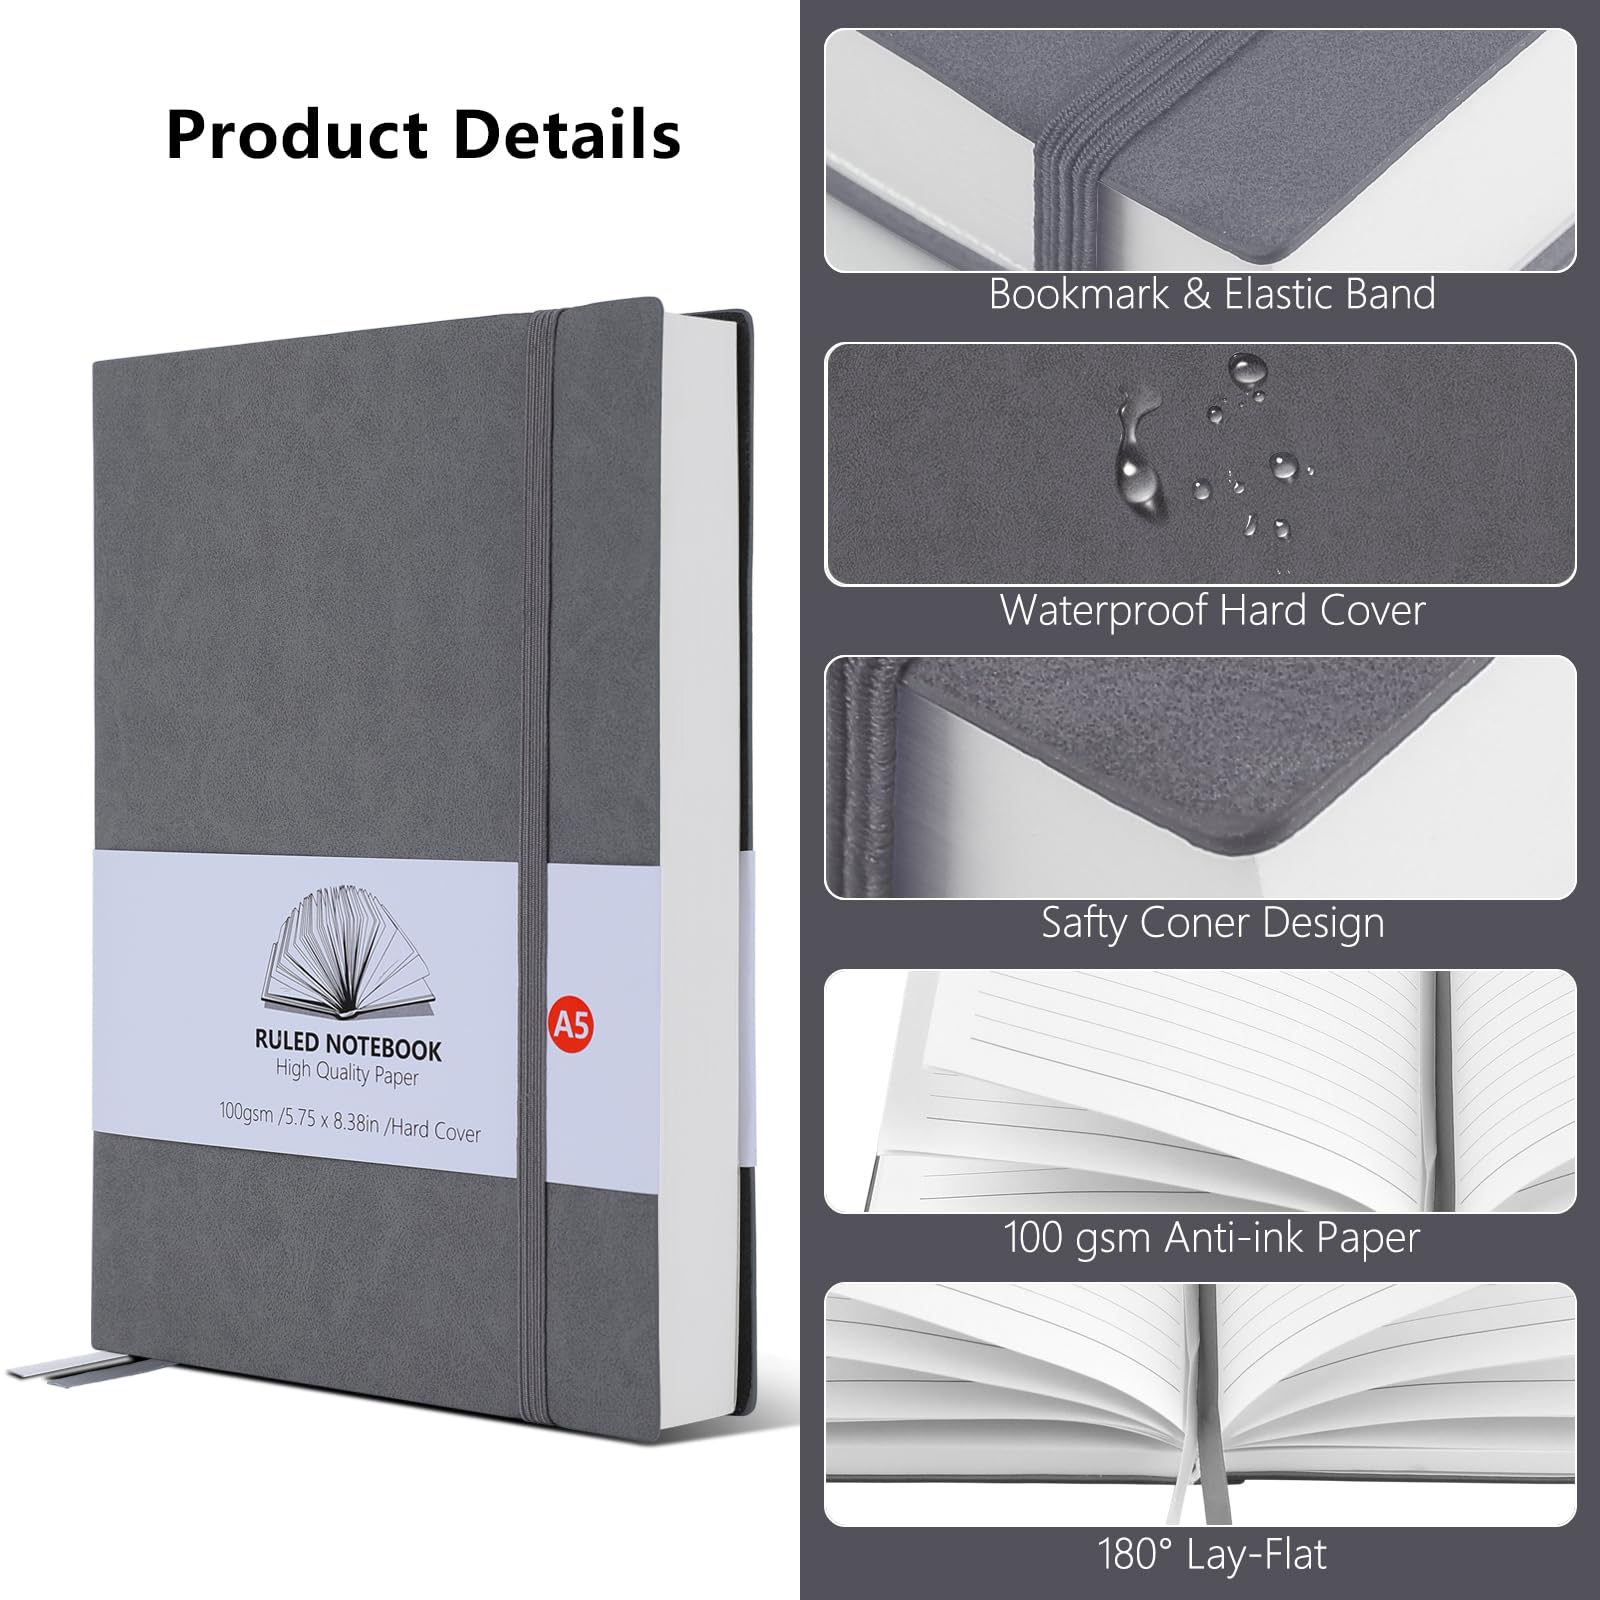 HIJYOO Notebook A5 Lined Journal 320 Pages 100gsm Paper Thick Note book Notepad with Inner Pocket, 2 ribbon page marker for Office School Home Business Writing & Note Taking (Grey)